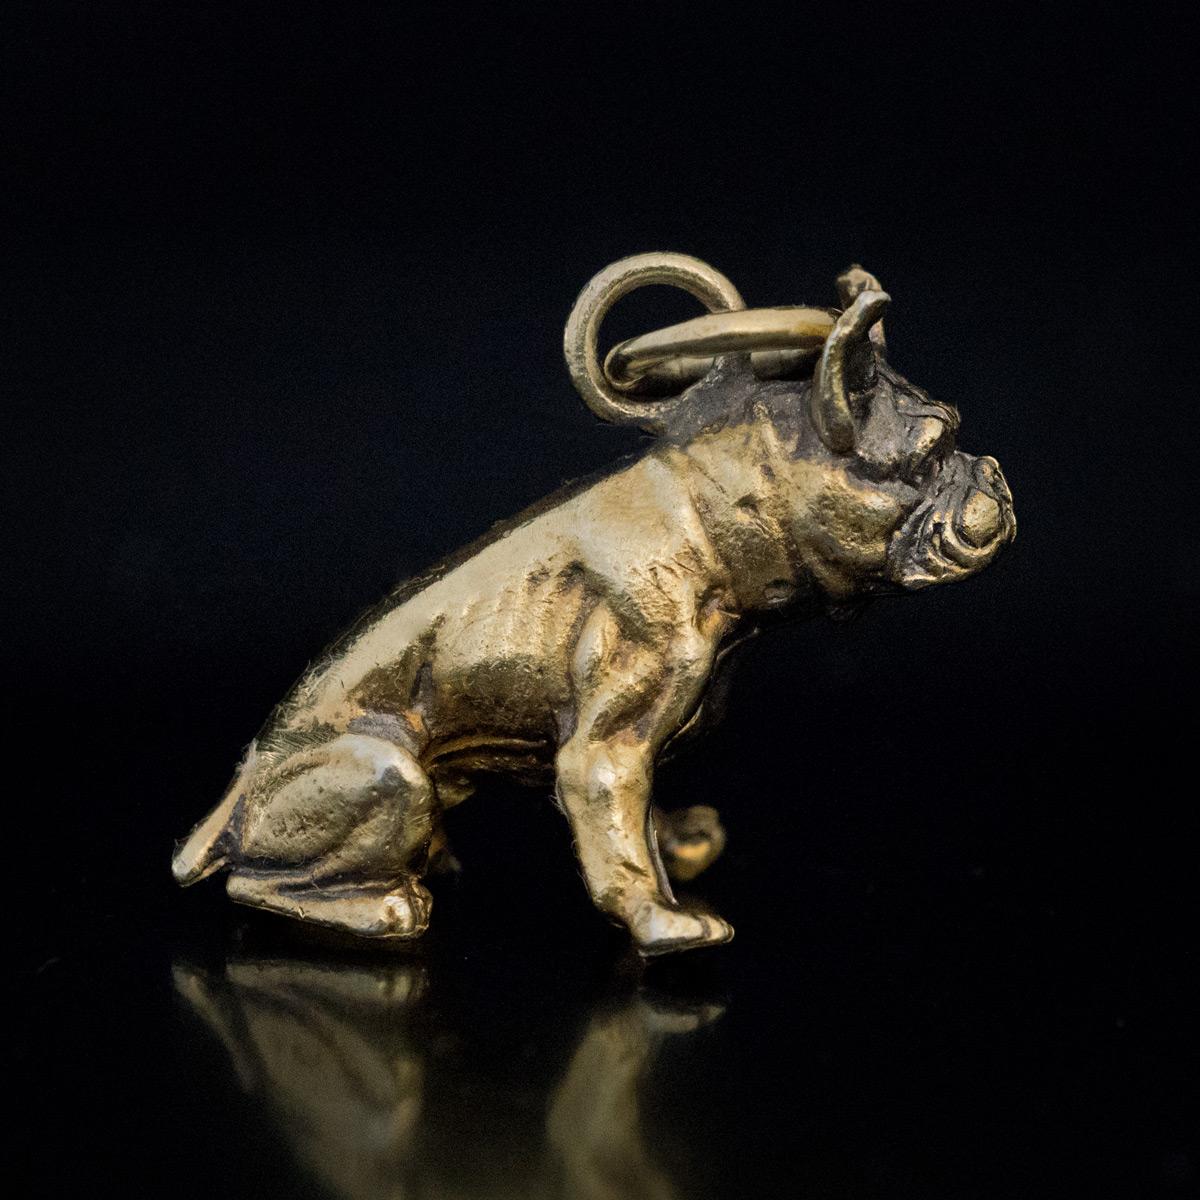 Circa 1870

An antique Russian gilded silver charm is finely modeled as a seated boxer dog. The charm is marked on suspension ring with 84 zolotnik Imperial silver standard.

Height 19 mm (2/3 in.)

Width 21 mm (7/8 in.)